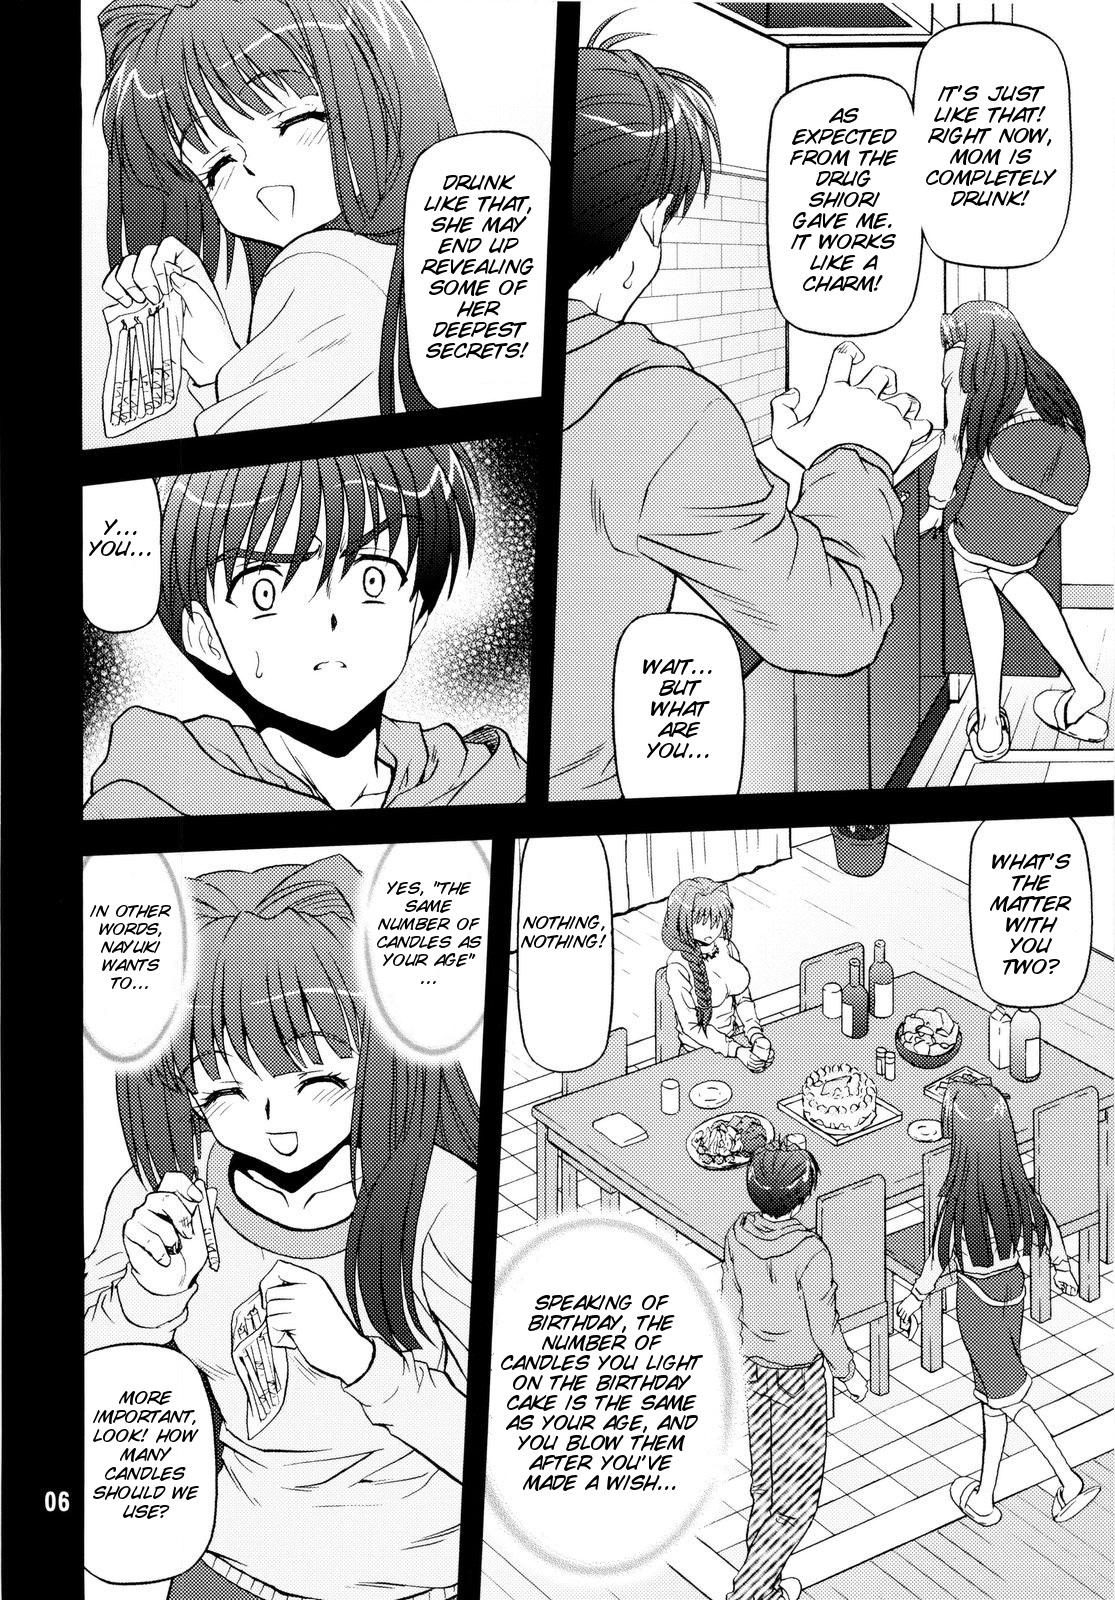 Old Young BLUE BLOOD'S vol. 24 - Kanon Coroa - Page 7